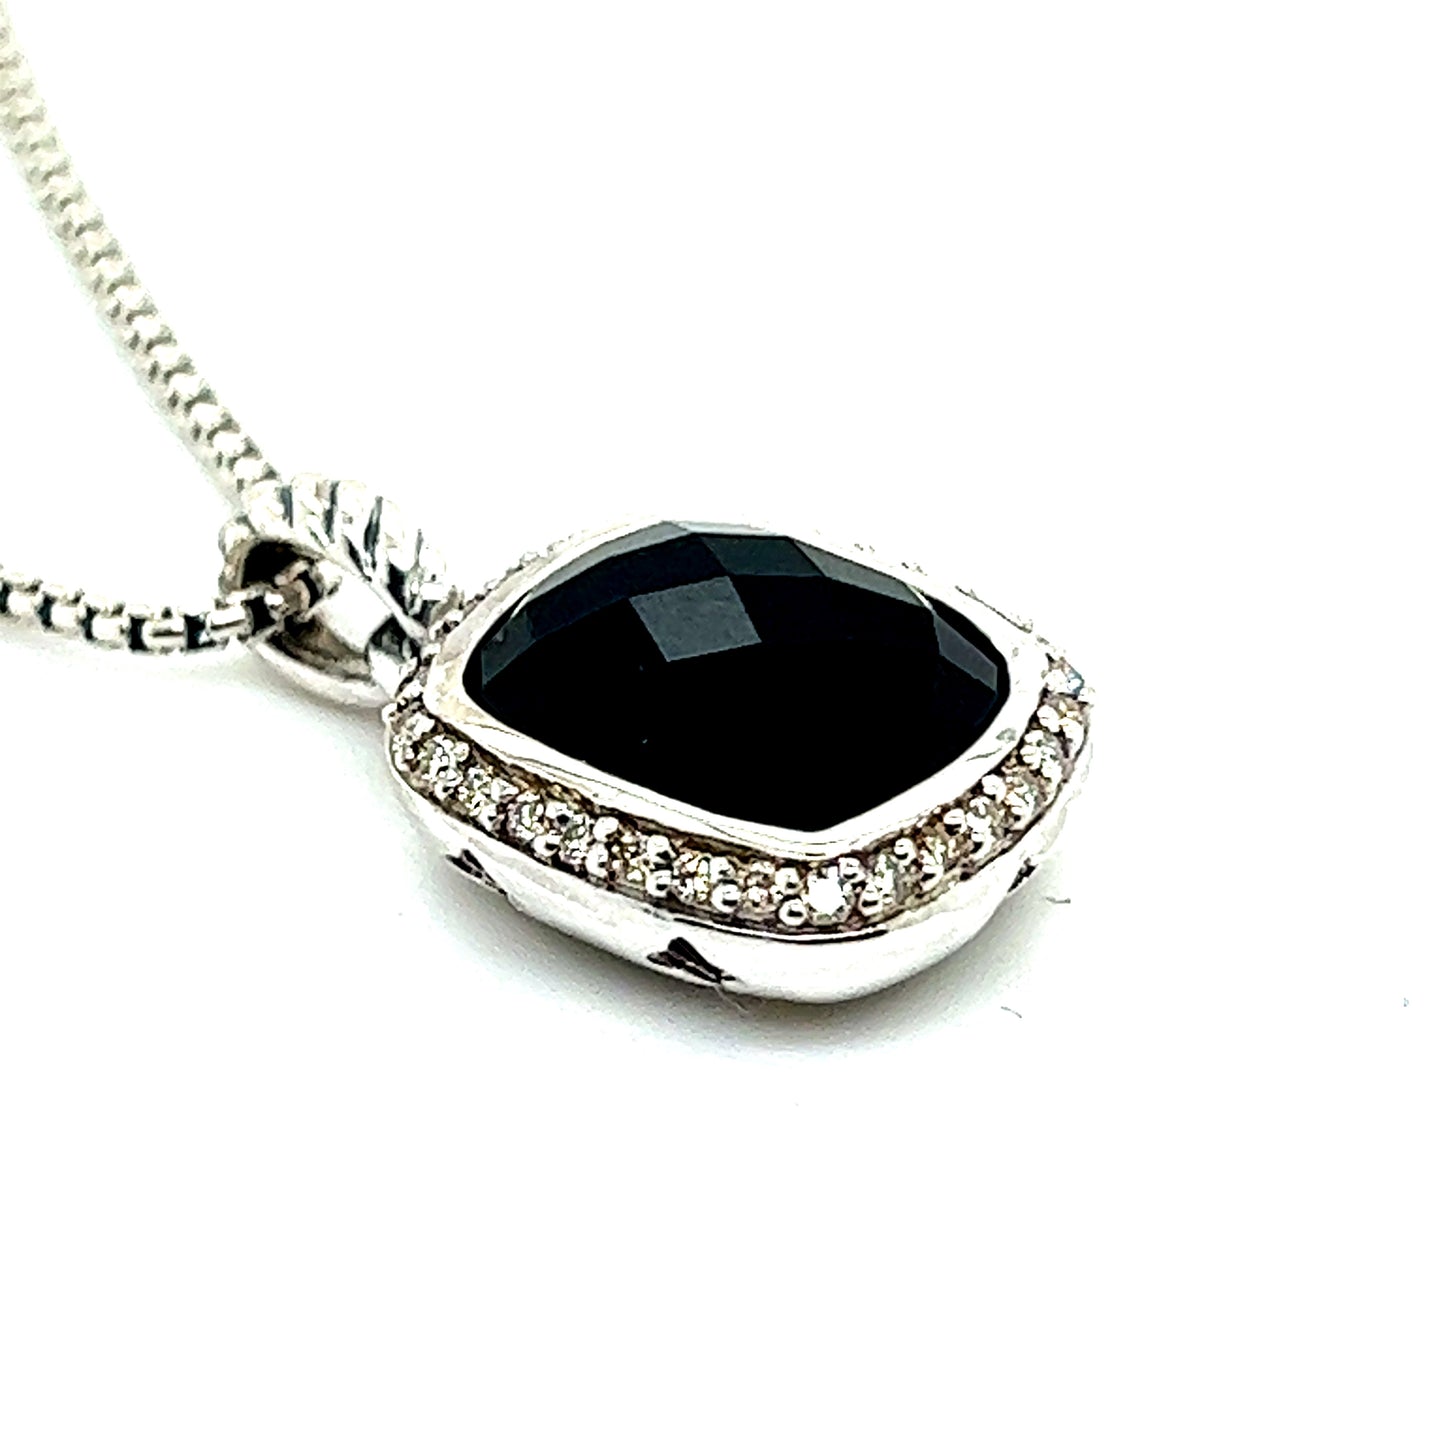 David Yurman Authentic Estate Onyx Noblesse Pendant Necklace 16" Silver 0.25 Cts DY231 - Certified Fine Jewelry